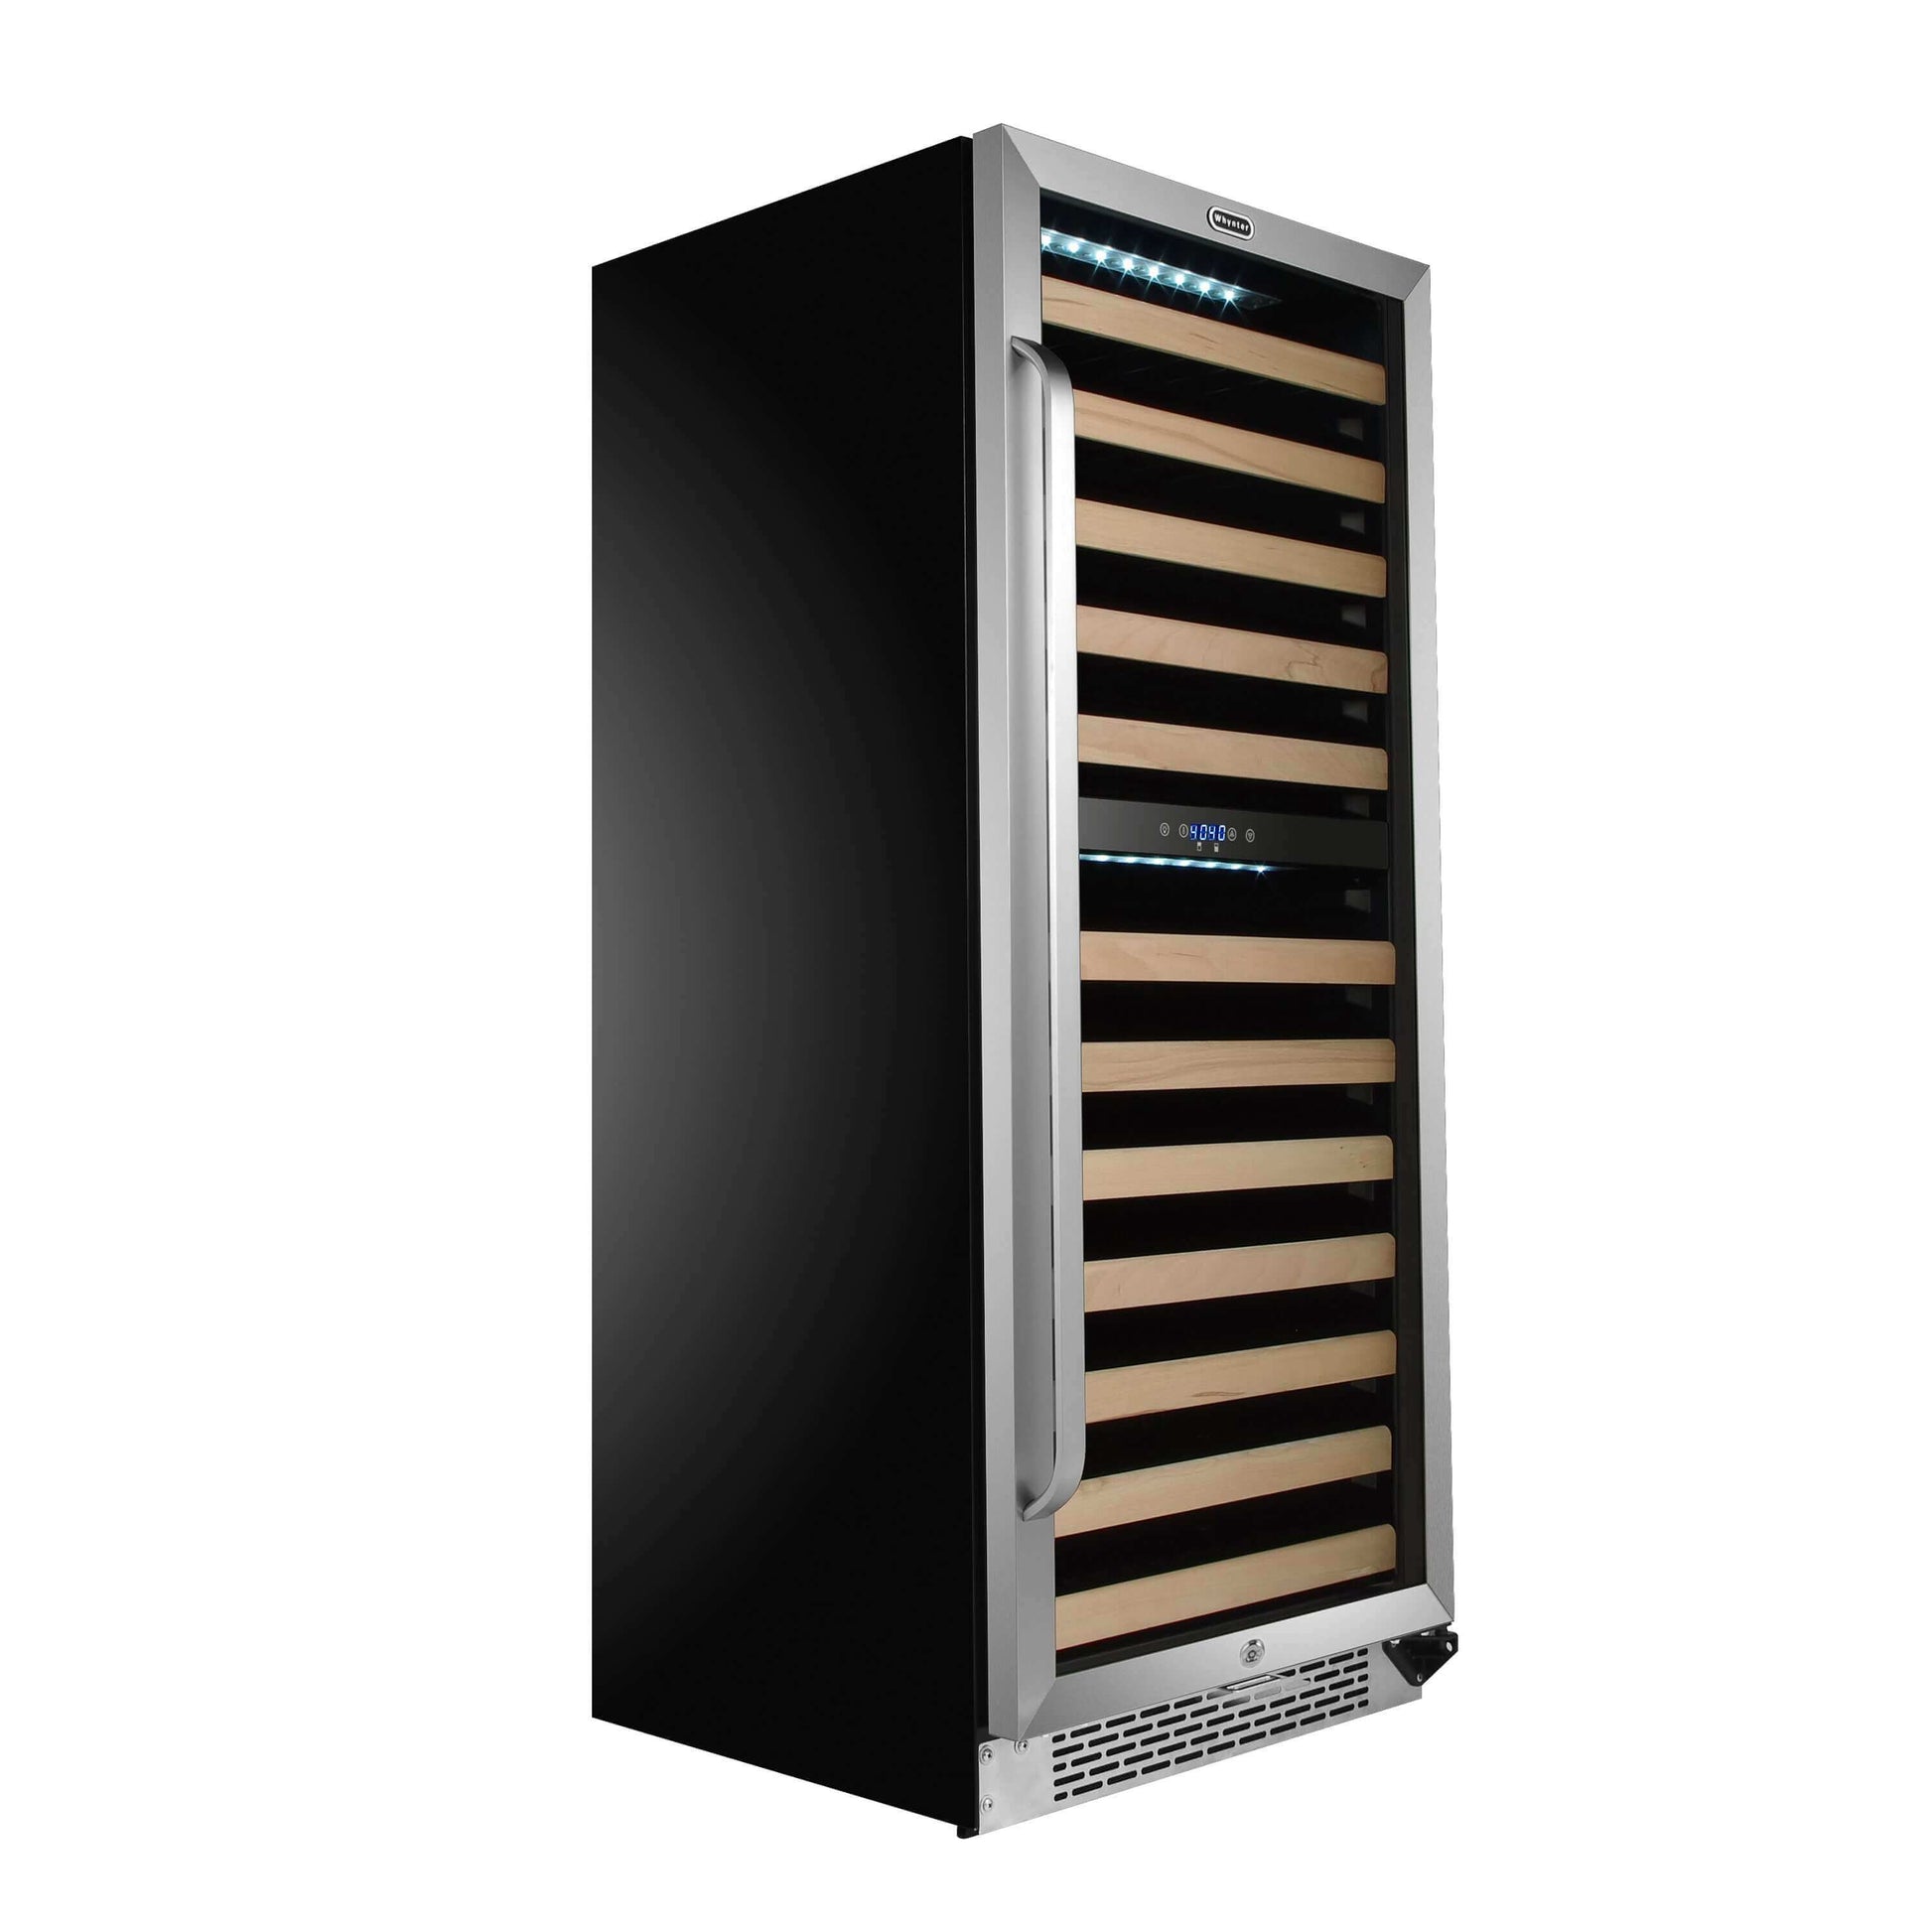 Whynter BWR-0922DZ/BWR-0922DZa 92 Bottle Built-in Stainless Steel Dual Zone Compressor Wine Refrigerator with Display Rack and LED display